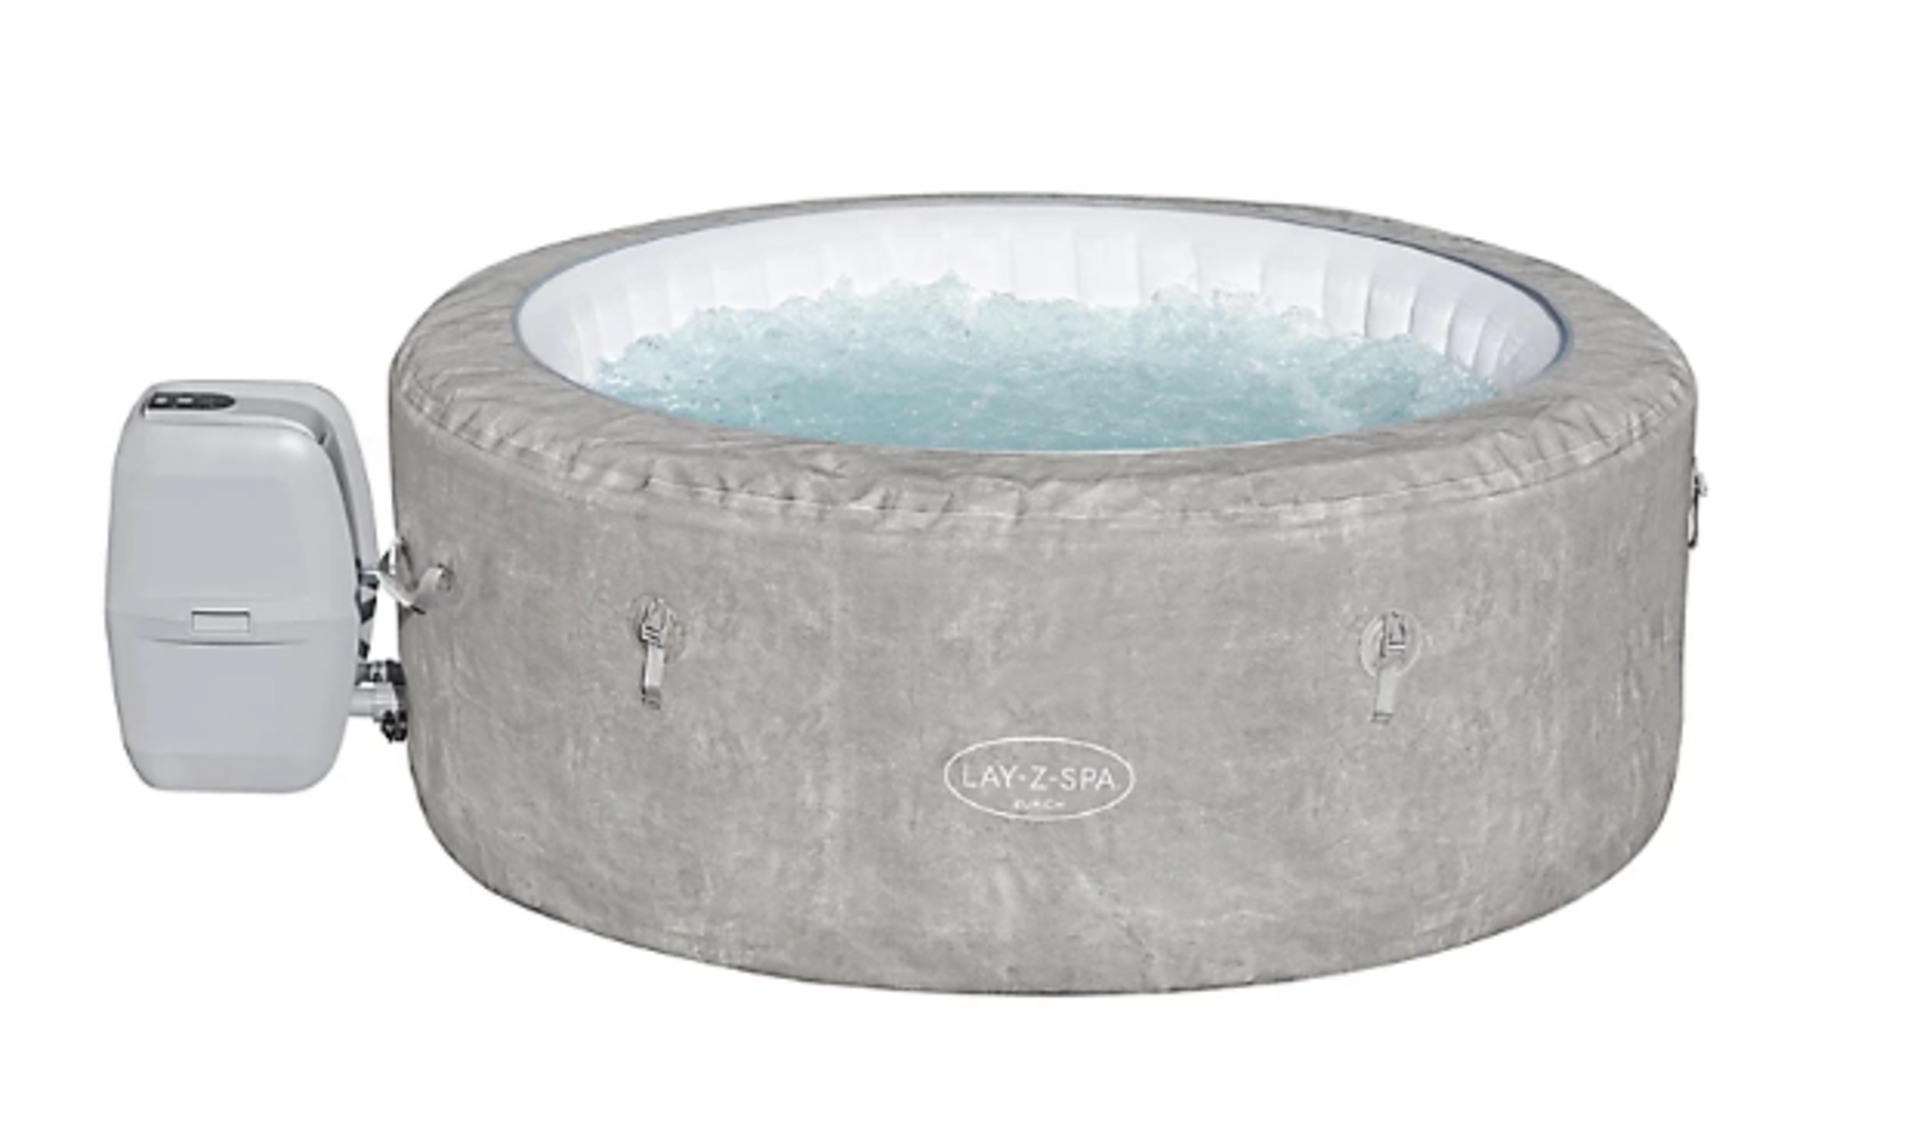 Lay-Z-Spa Zurich 4 person Inflatable Hot Tub. - ER. RRP £500.00. The Zurich AirJet™ is one of our